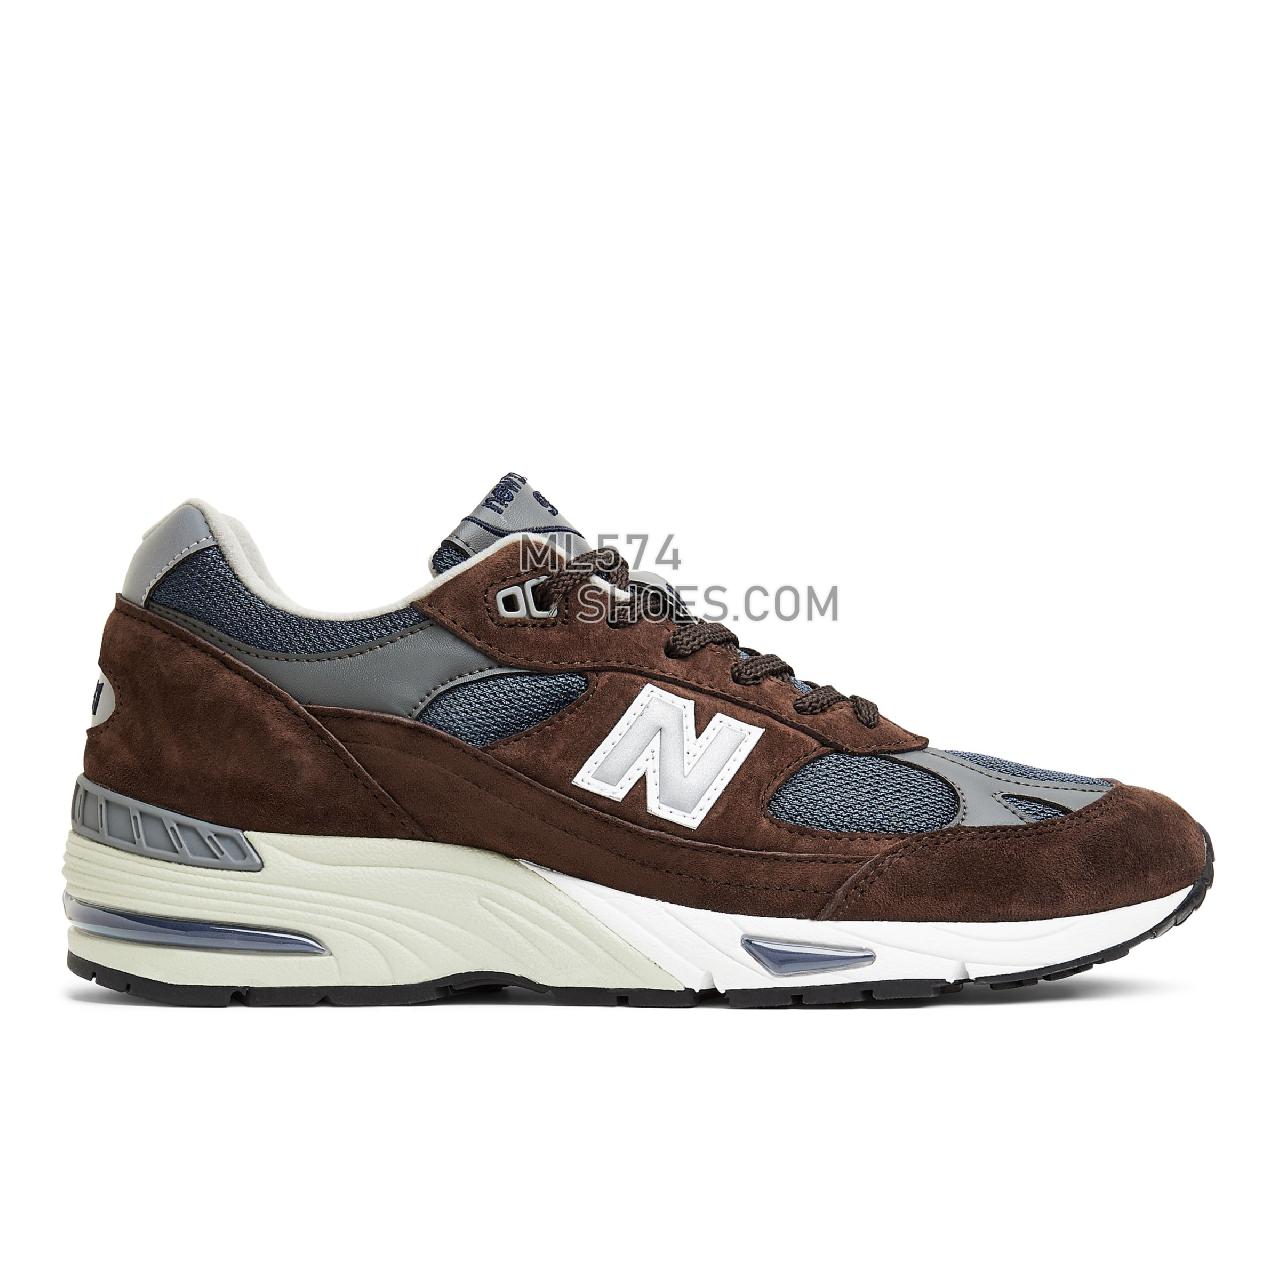 New Balance MADE in UK 991 - Men's Made in USA And UK Sneakers - Brown with Navy and Grey - M991BNG